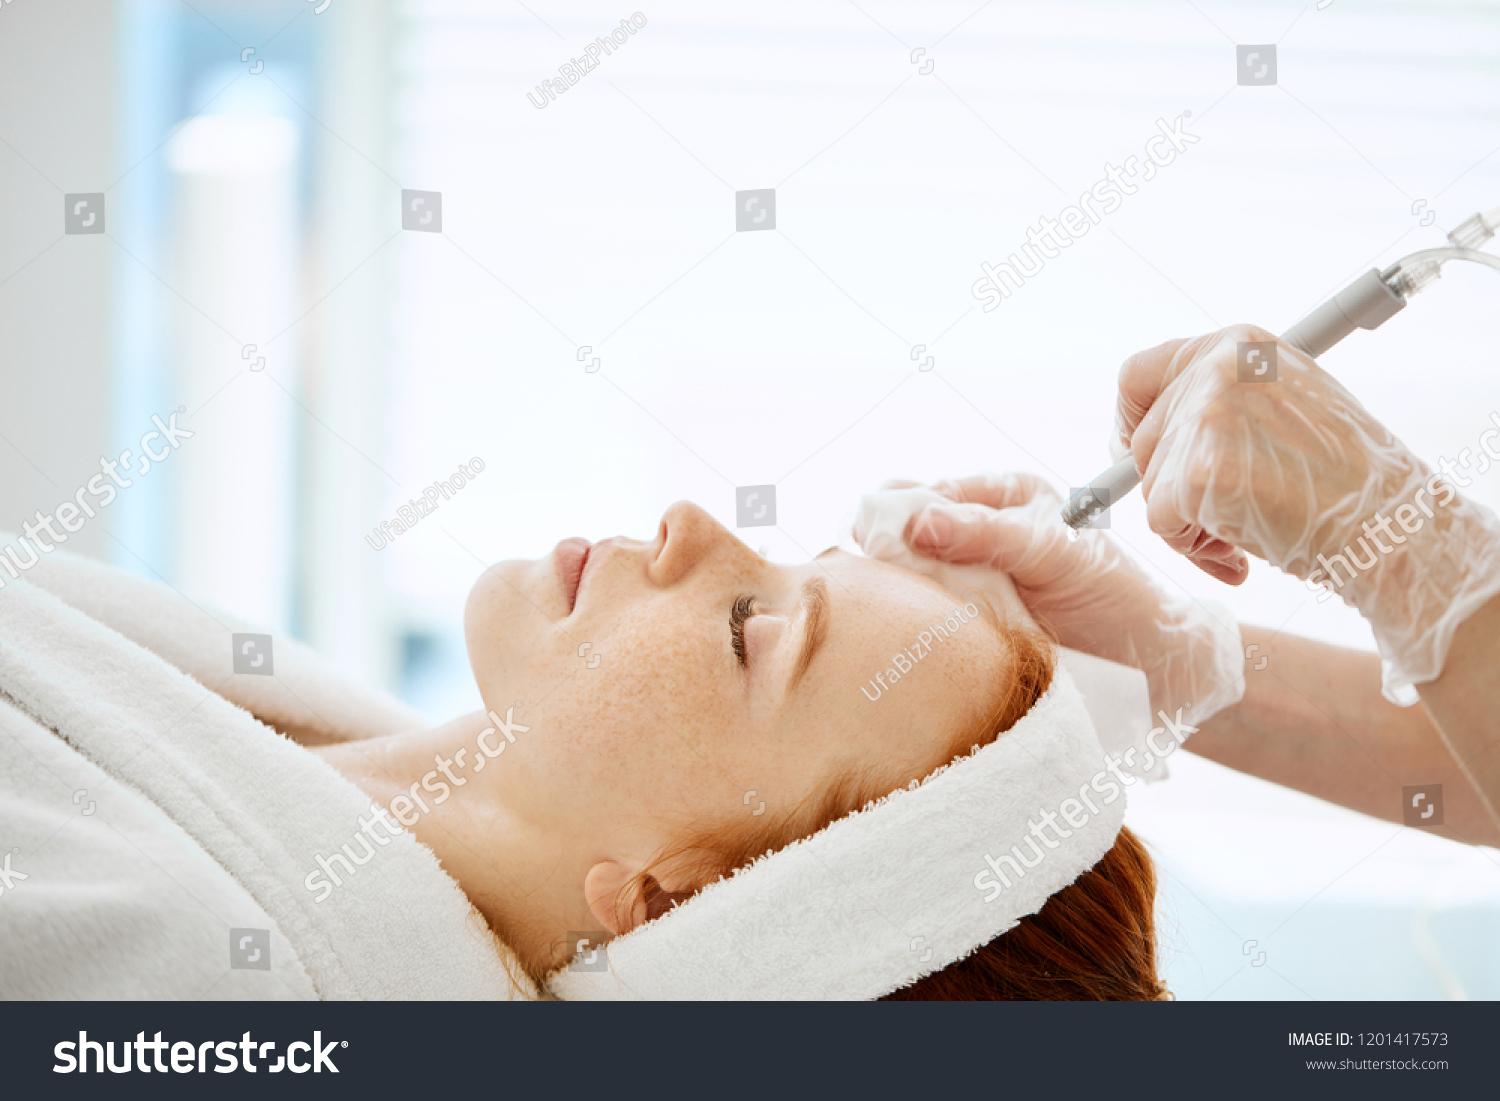 Caucasian woman getting face peeling procedure in a beauty clinic, close up. Rejuvenating facial gas liquid treatment. Hydro air skin cleansing operation. #1201417573